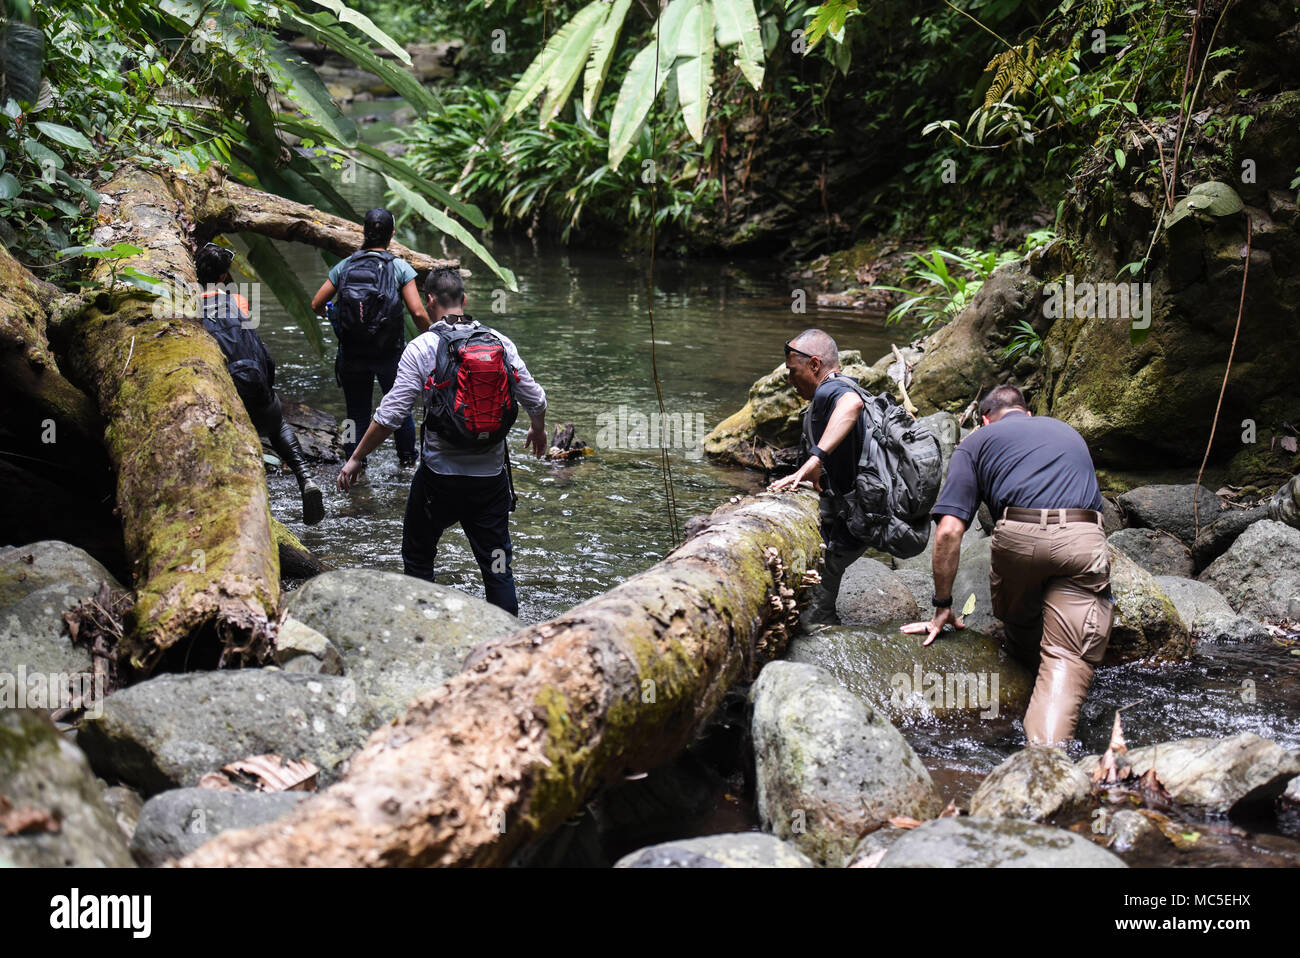 Members of the 346th Air Expeditionary Group hike through a river in the Darien National Park, Panama, April 2, 2018, during exercise New Horizons 2018. Following the hike, 346th AEG members spoke to local village members about the assistance that New Horizons 2018 will bring to the communities throughout the region. Exercise New Horizons is a joint training exercise where all branches of the U.S. military conduct training in civil engineer, medical and support services while benefiting the local community. (U.S. Air Force photo by Senior Airman Dustin Mullen/Released) Stock Photo